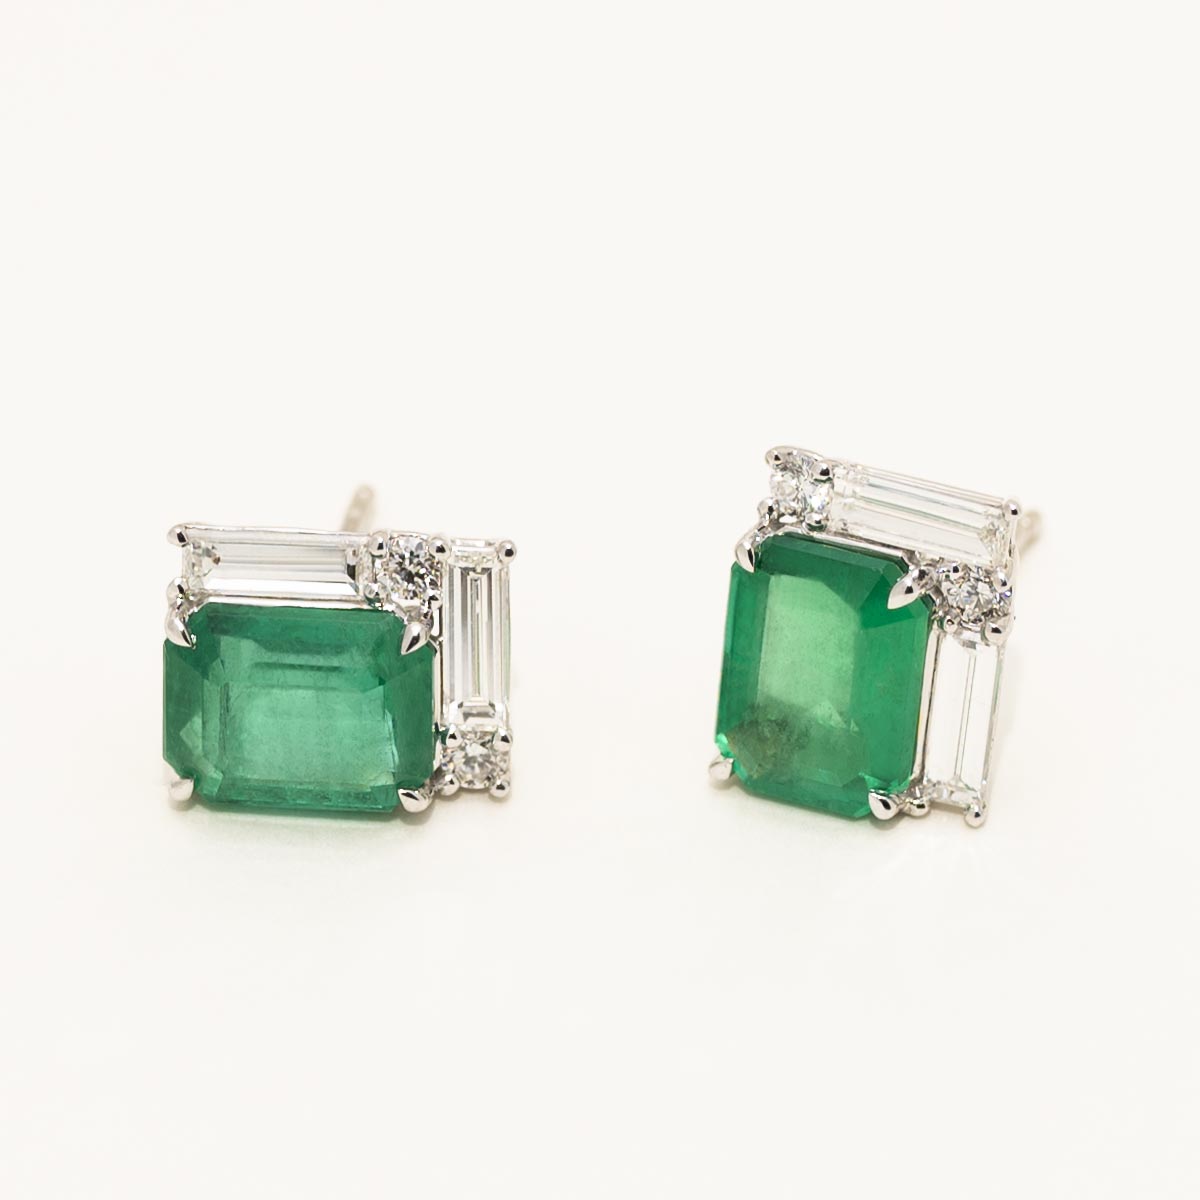 Emerald Art Deco Stud Earrings in 18kt White Gold with Diamonds (7/8ct tw)